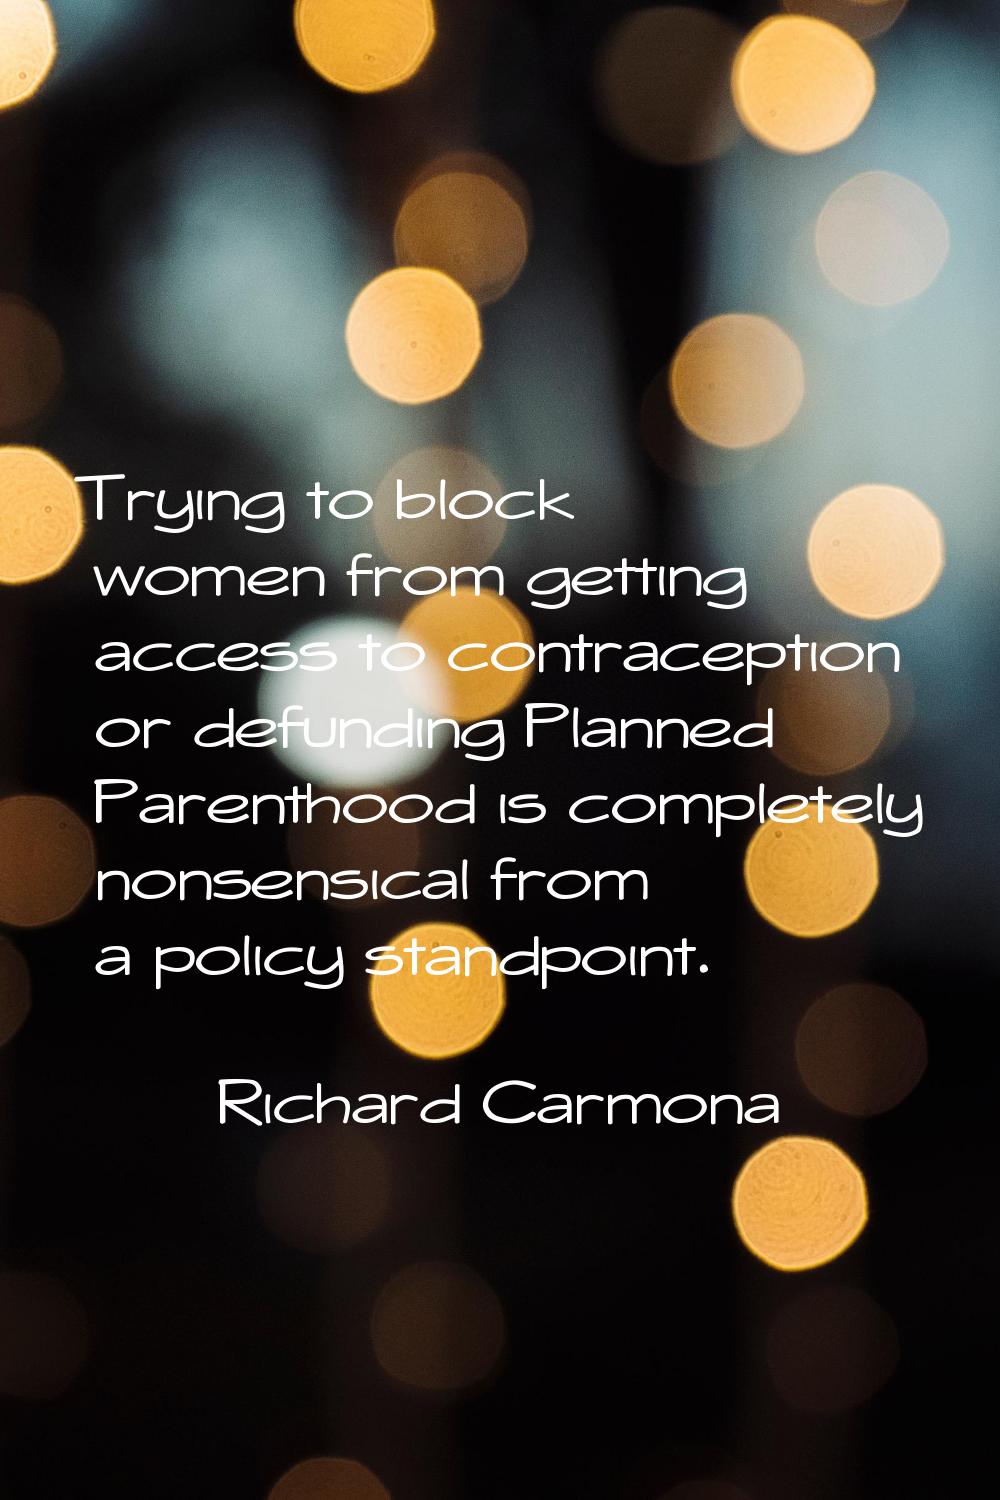 Trying to block women from getting access to contraception or defunding Planned Parenthood is compl